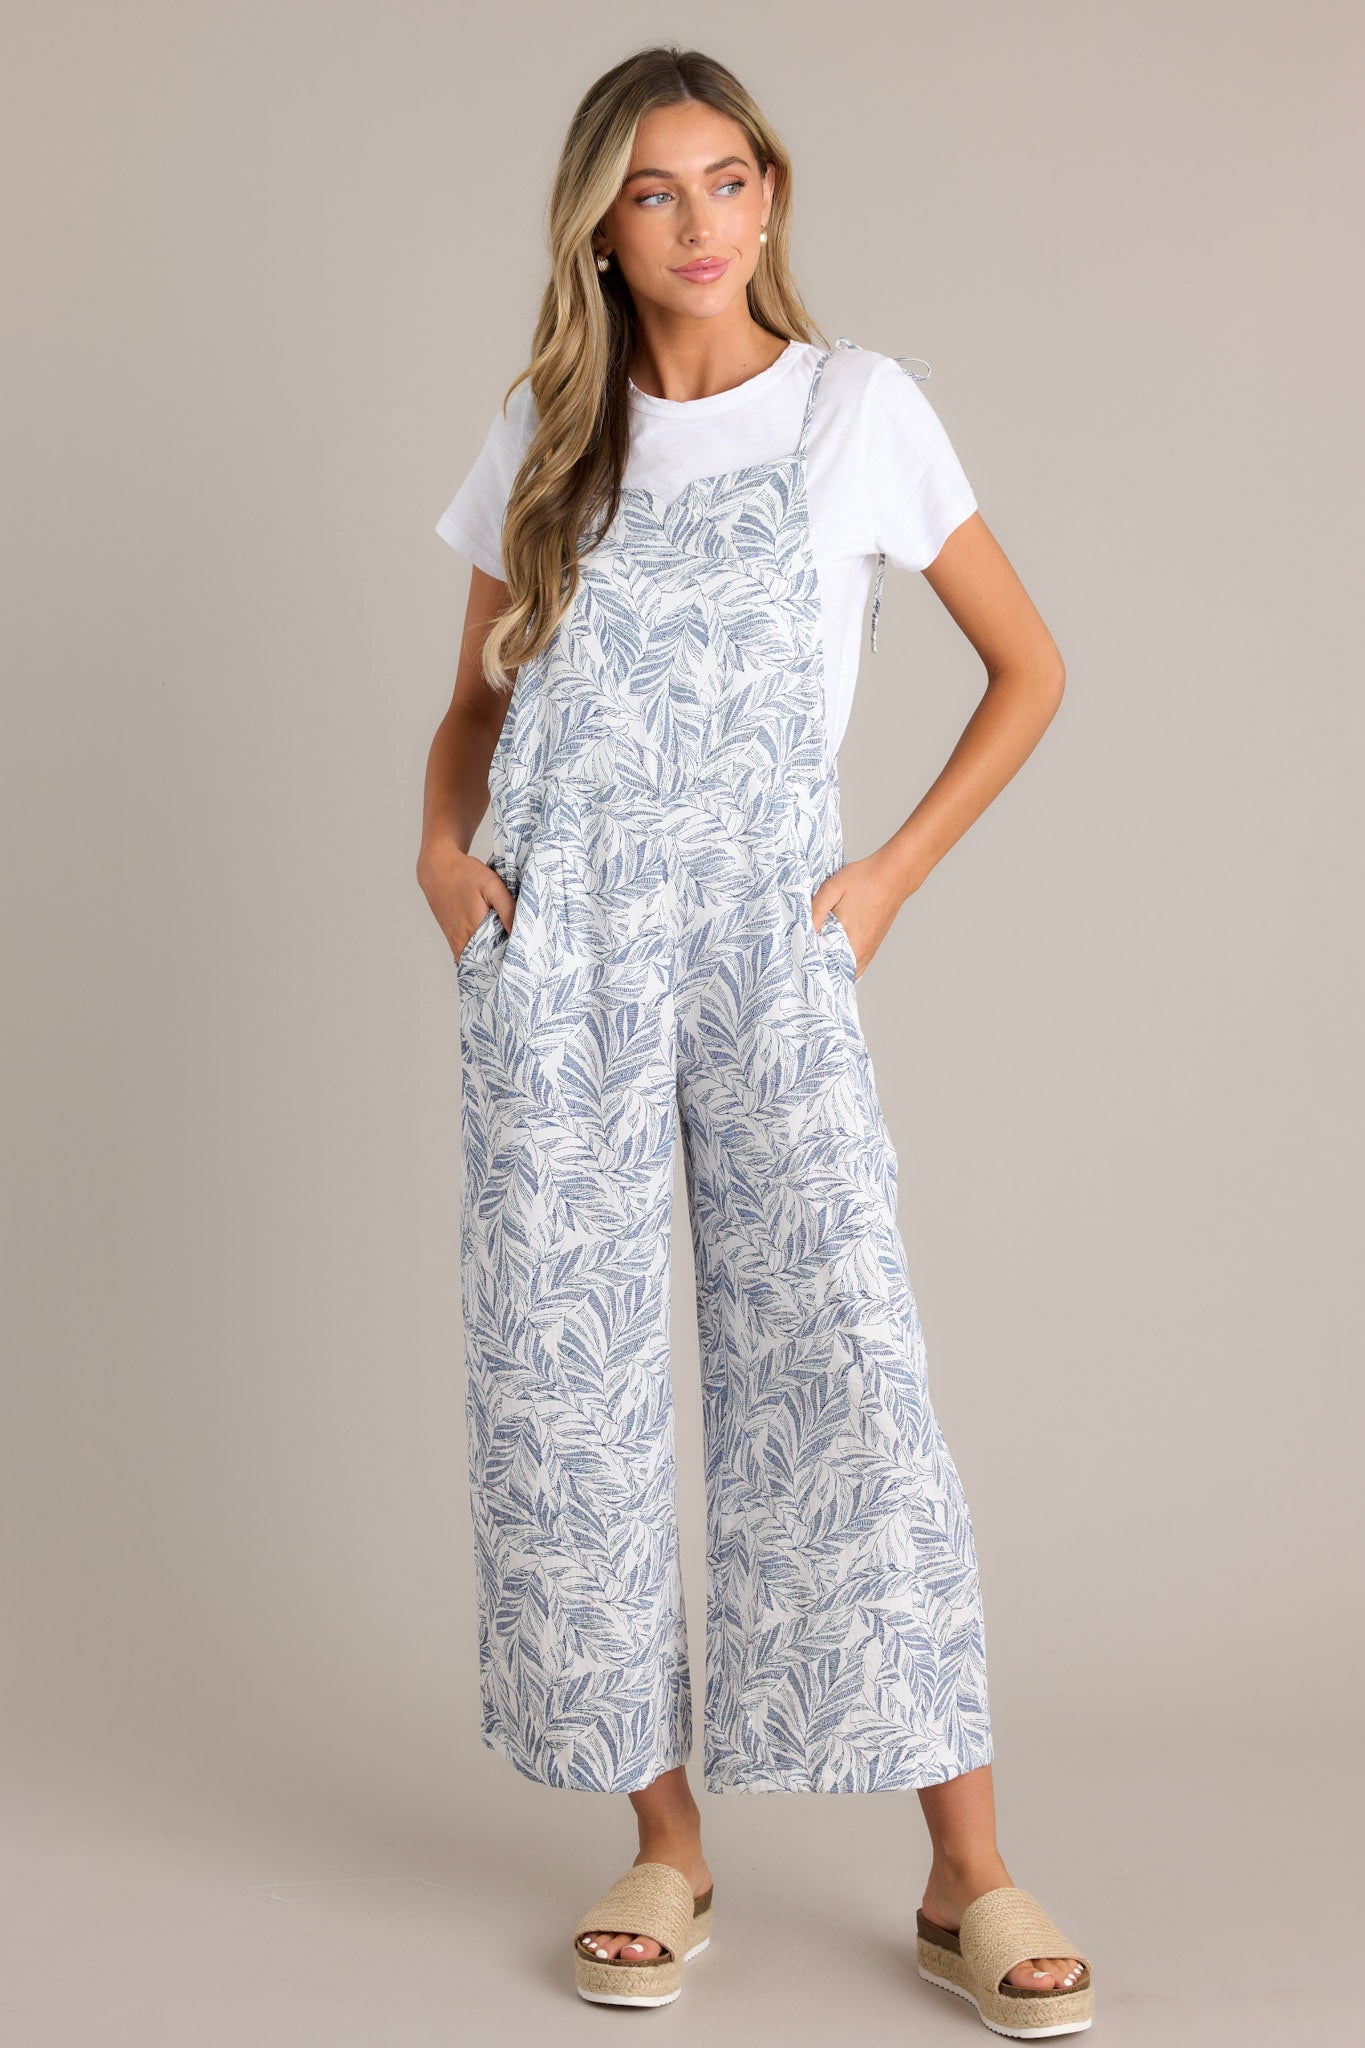 Full body view of this Relaxed-fit jumpsuit with a blue and white leaf pattern, wide leg cut, and adjustable shoulder ties.